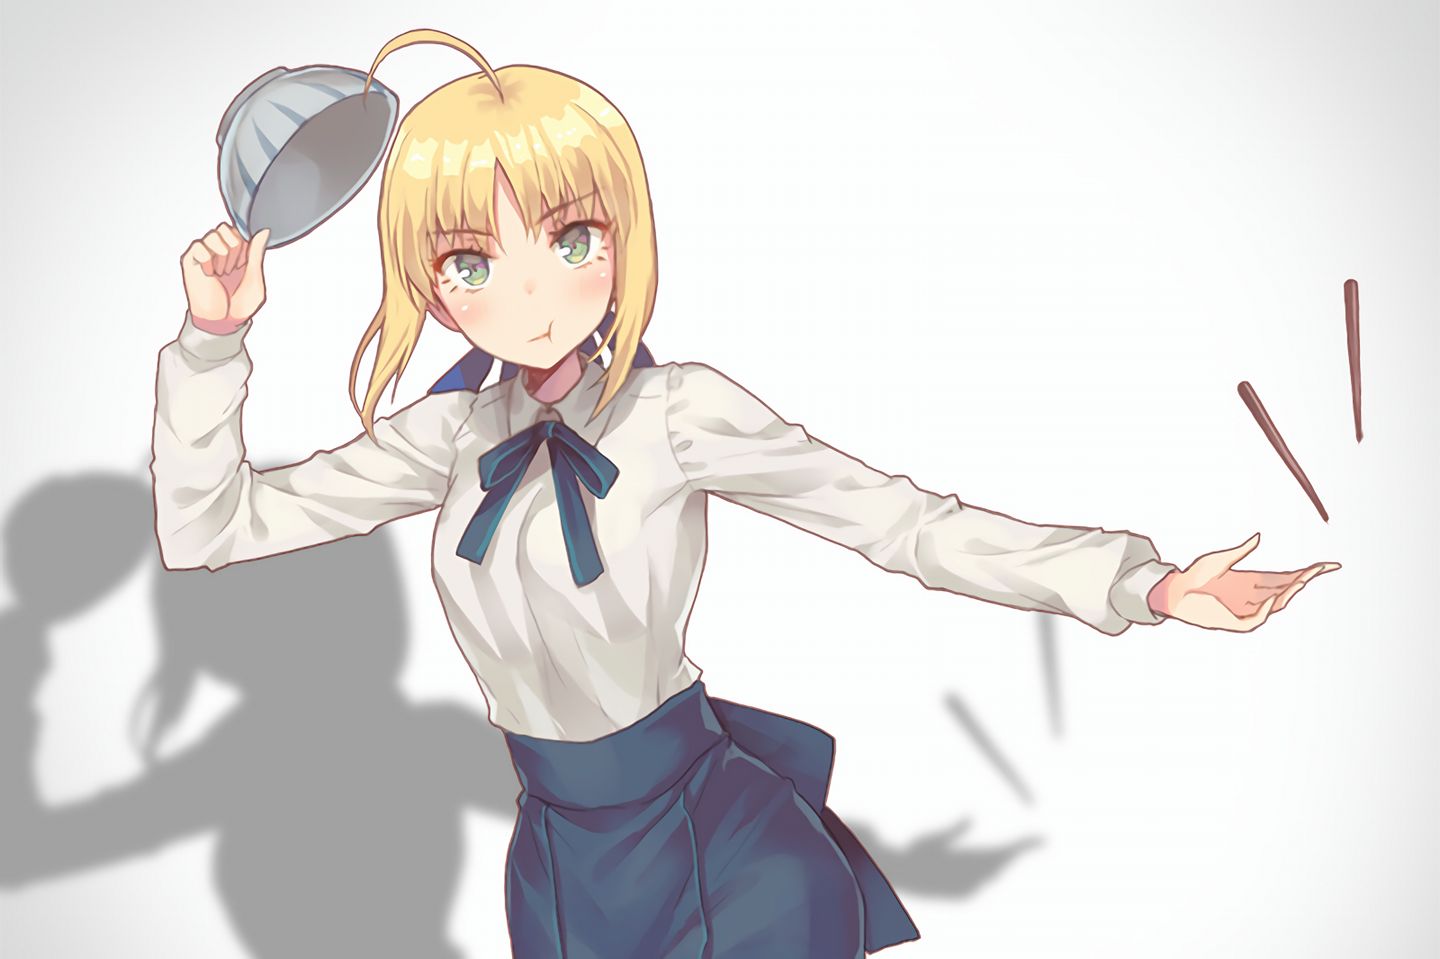 Anime 1440x959 Fate series Fate/Stay Night anime girls Saber